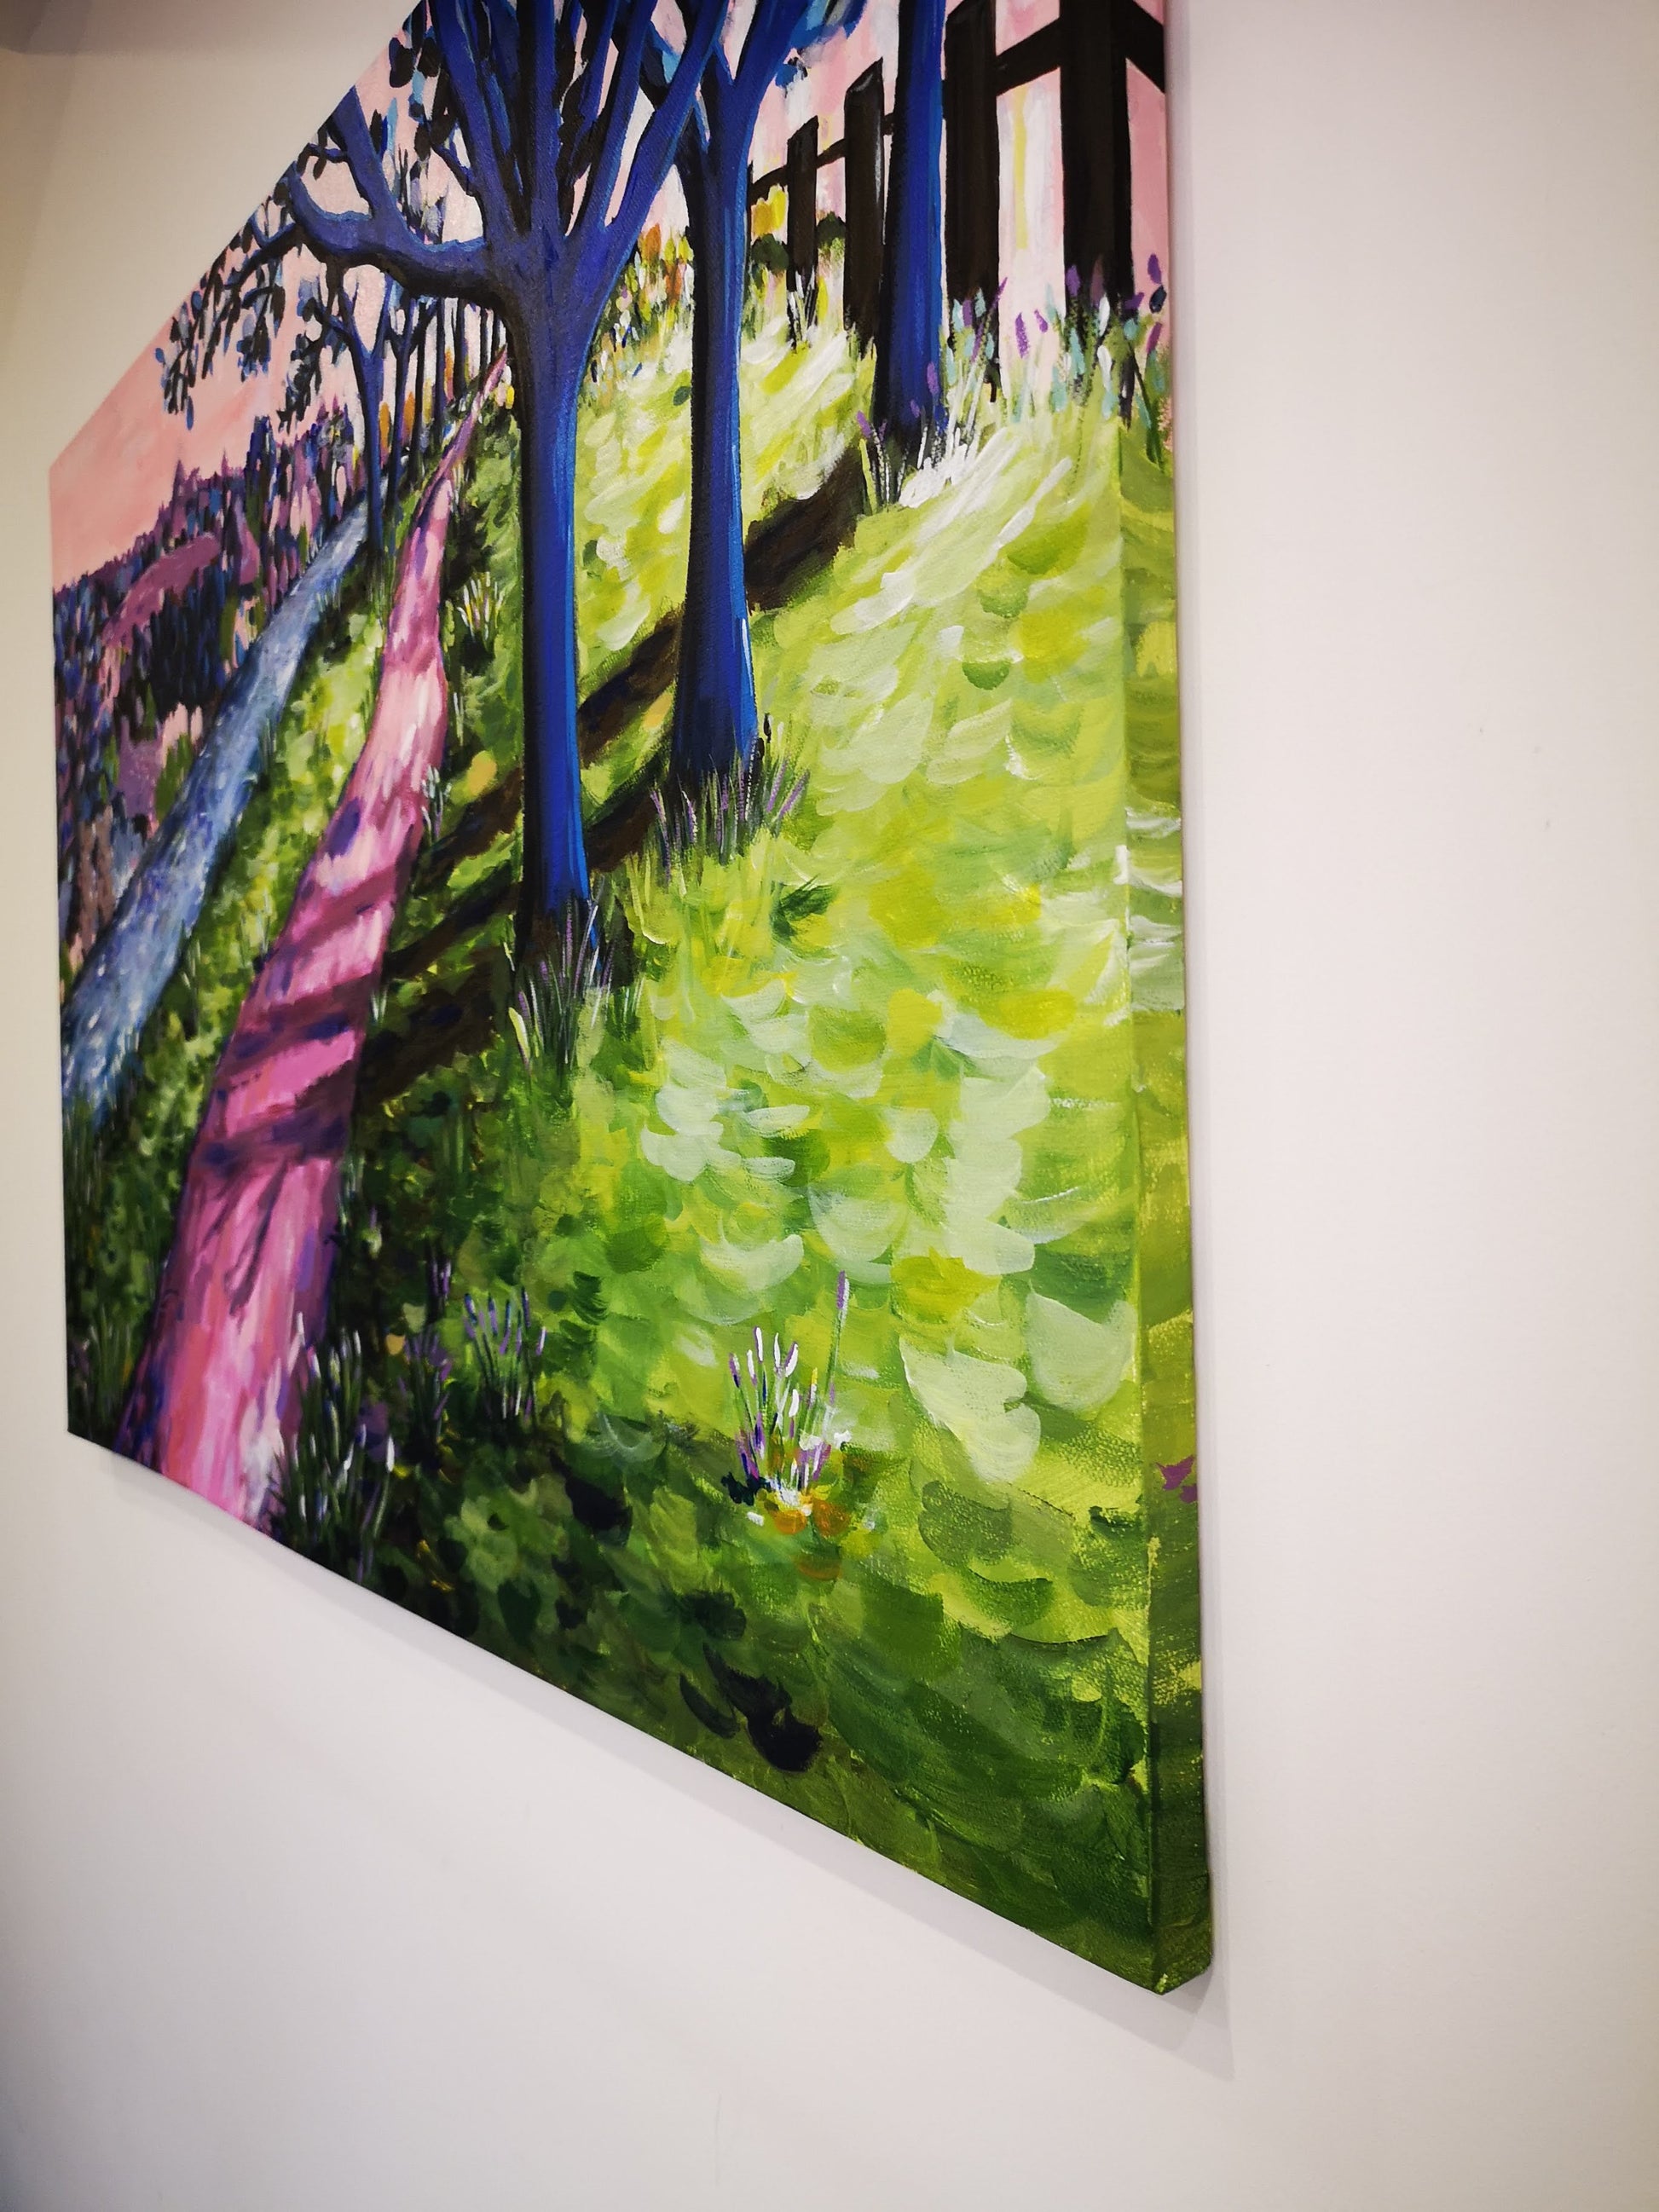 Colourful abstract landscape of an enchanting woodland scene with a shady path, trees, a river and colourful abstract bushes. Photo illustrating painting wrapped around the canvas edge.Acrylic painting by Judy Century Art.